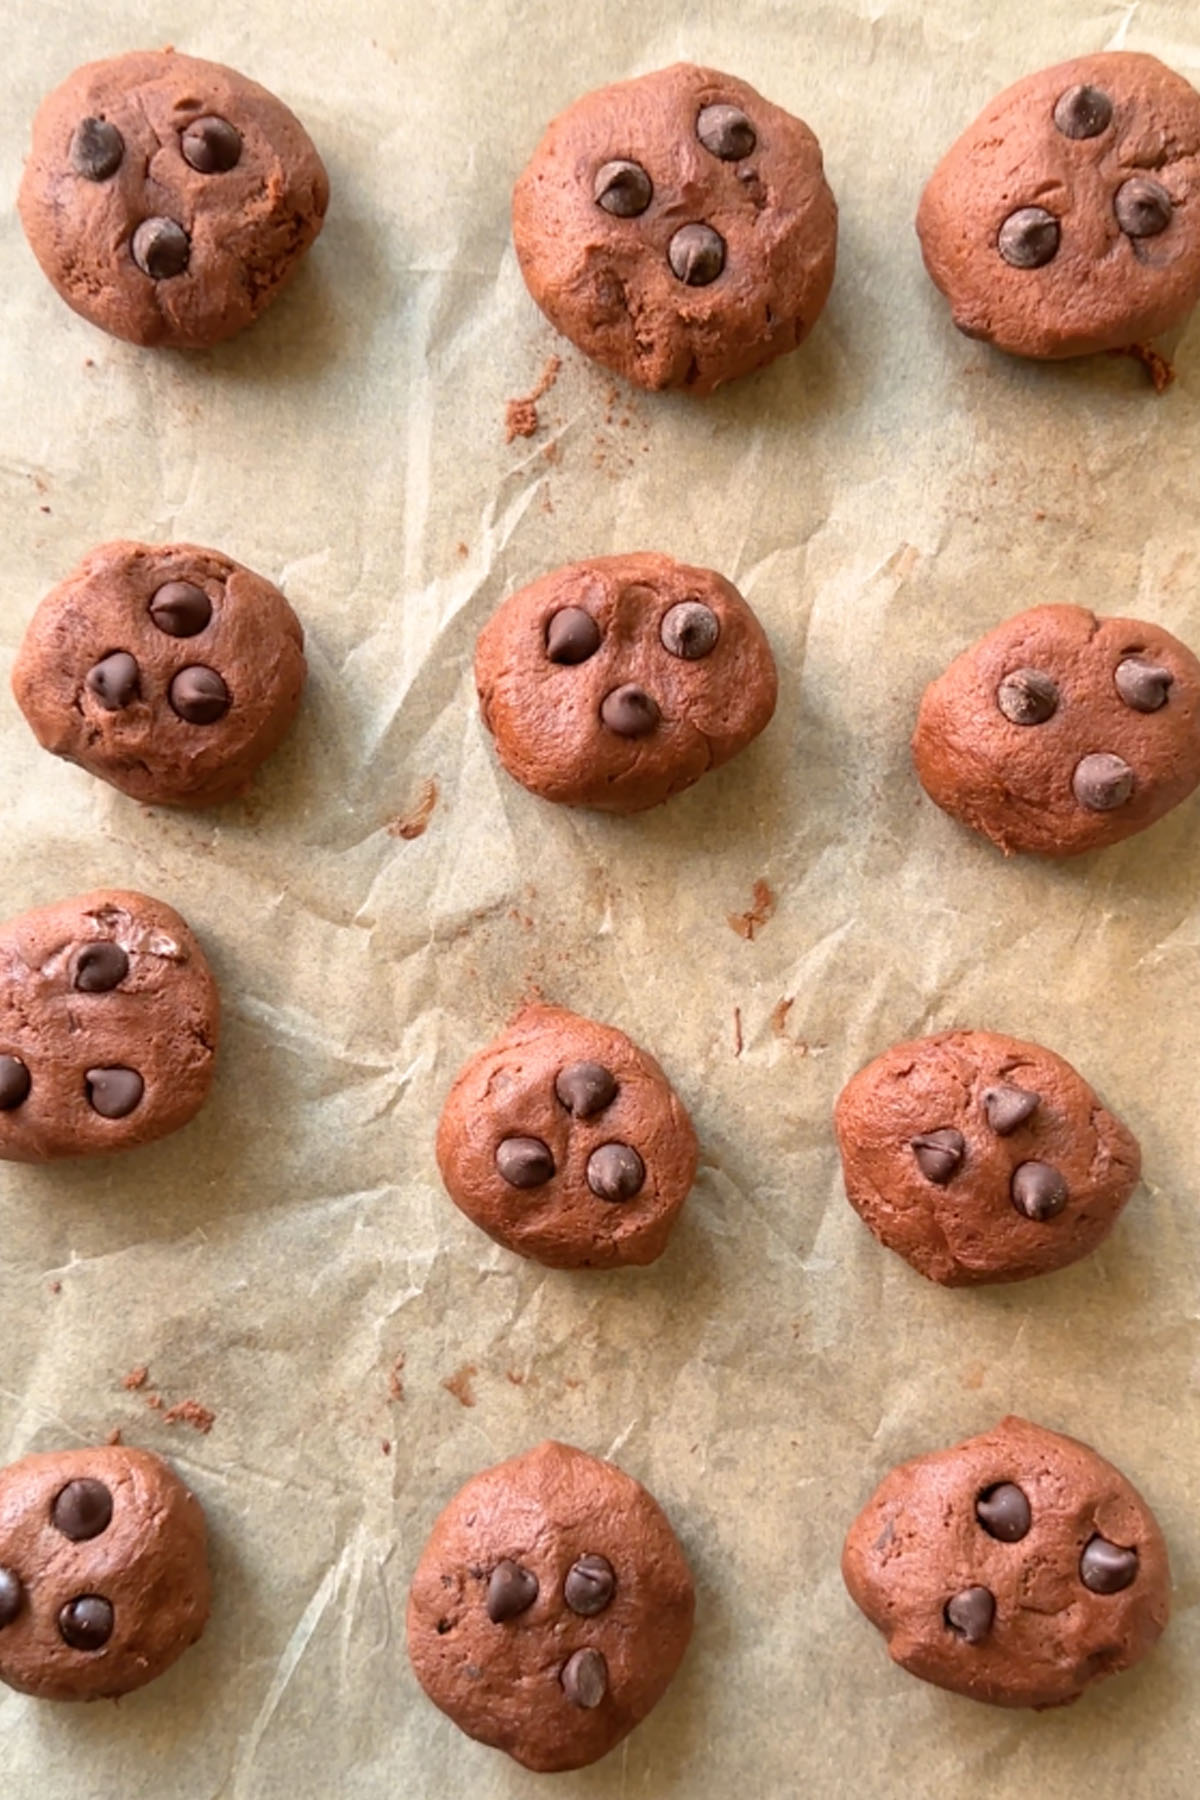 12 chocolate cookie dough balls are set evenly on a parchment lined baking sheet.